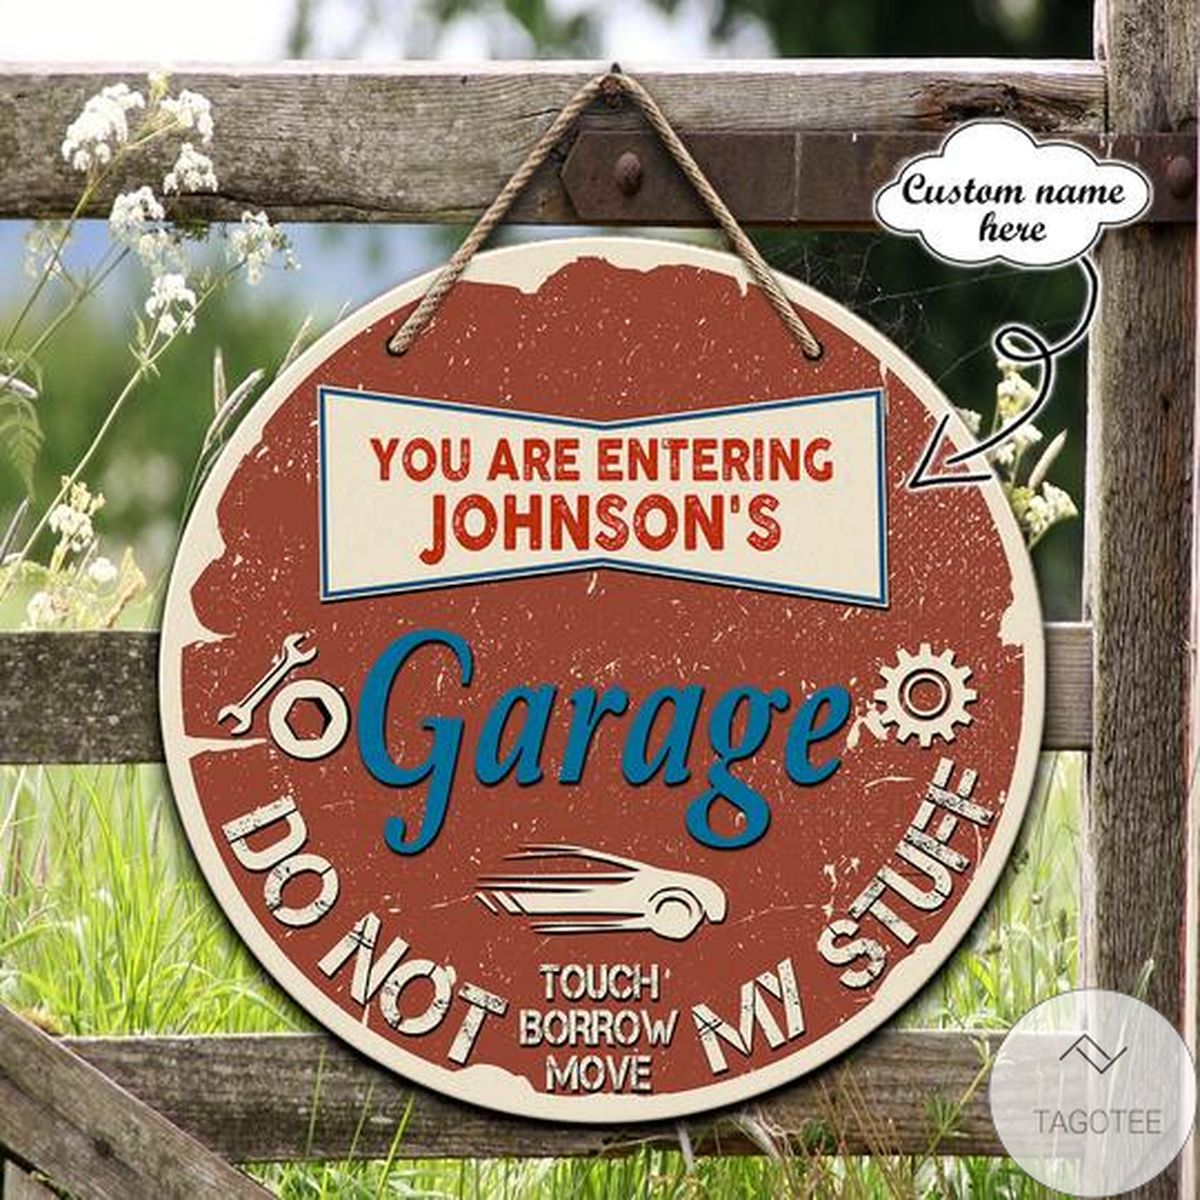 Personalized Garage Do Not Touch Borrow Move My Stuff Round Wooden Sign